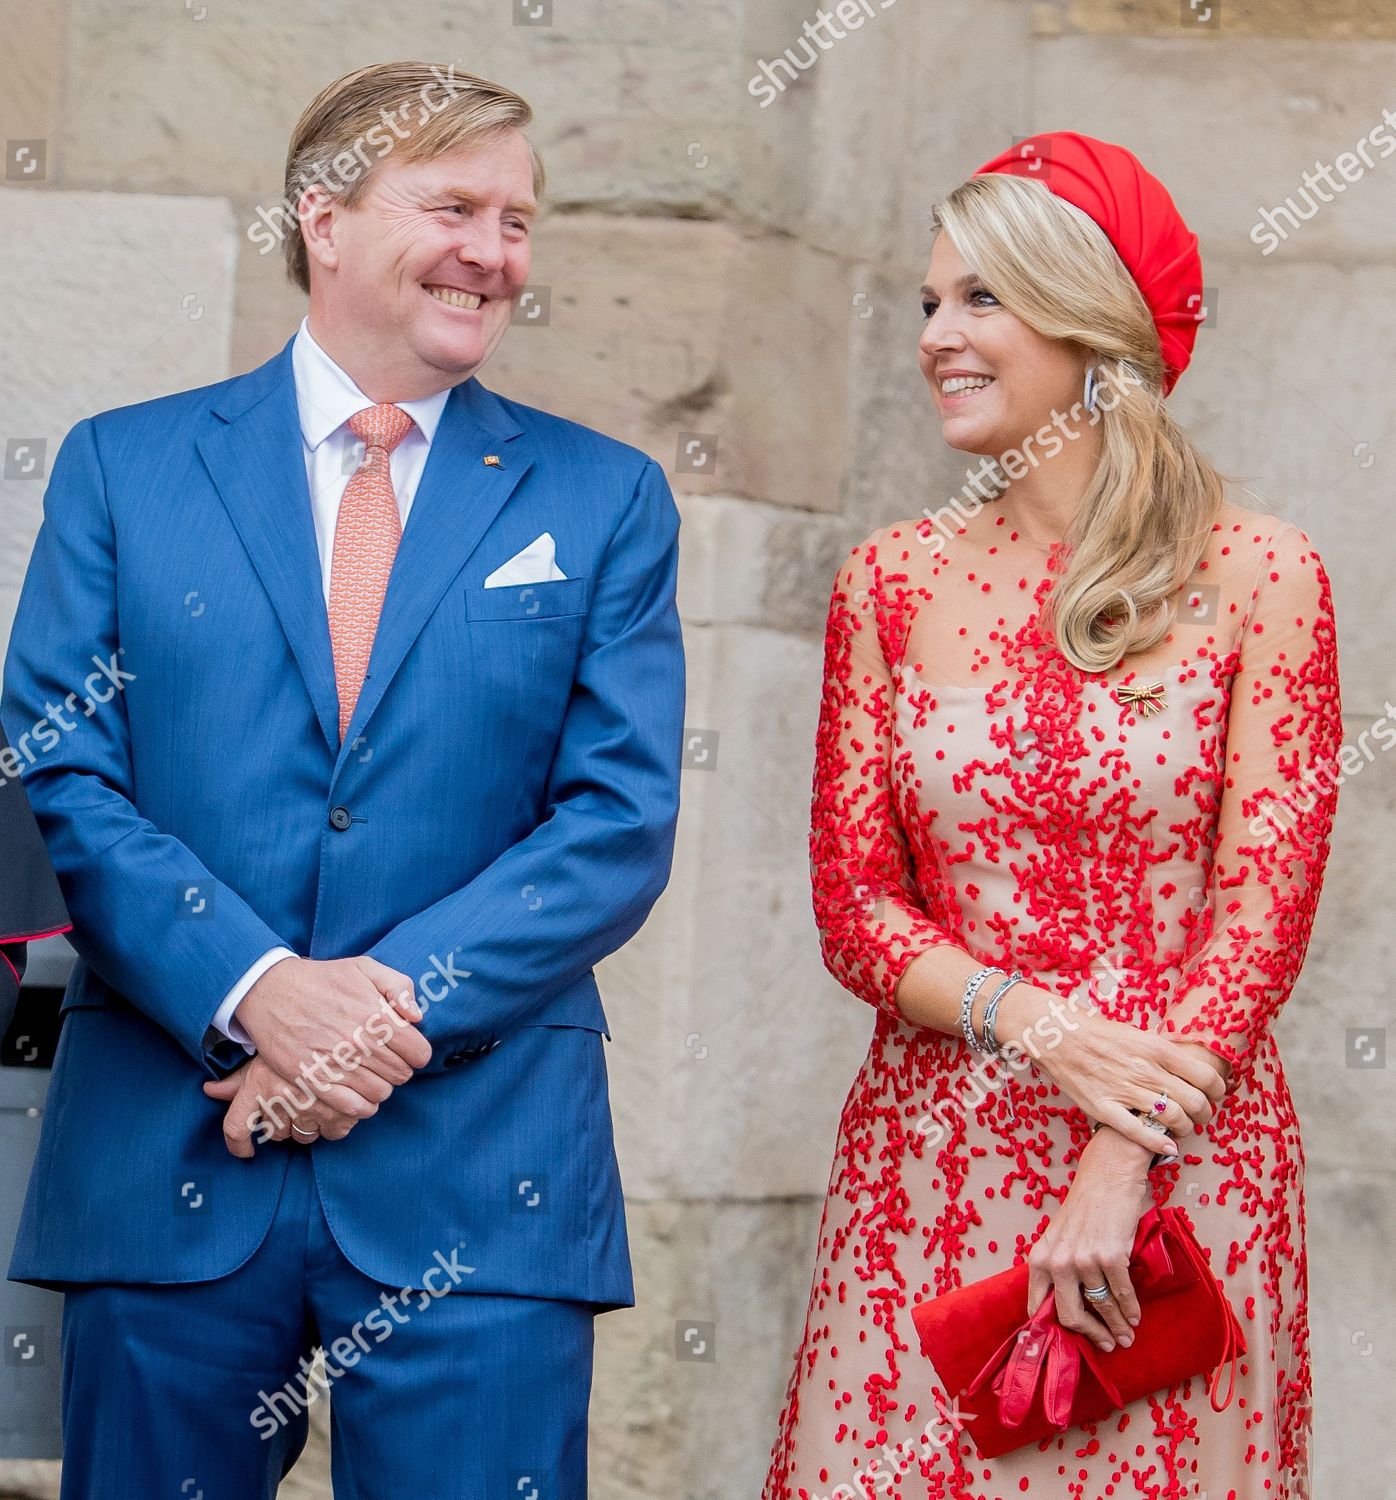 king-willem-alexander-and-queen-maxima-visit-to-germany-shutterstock-editorial-9924632ae.jpg